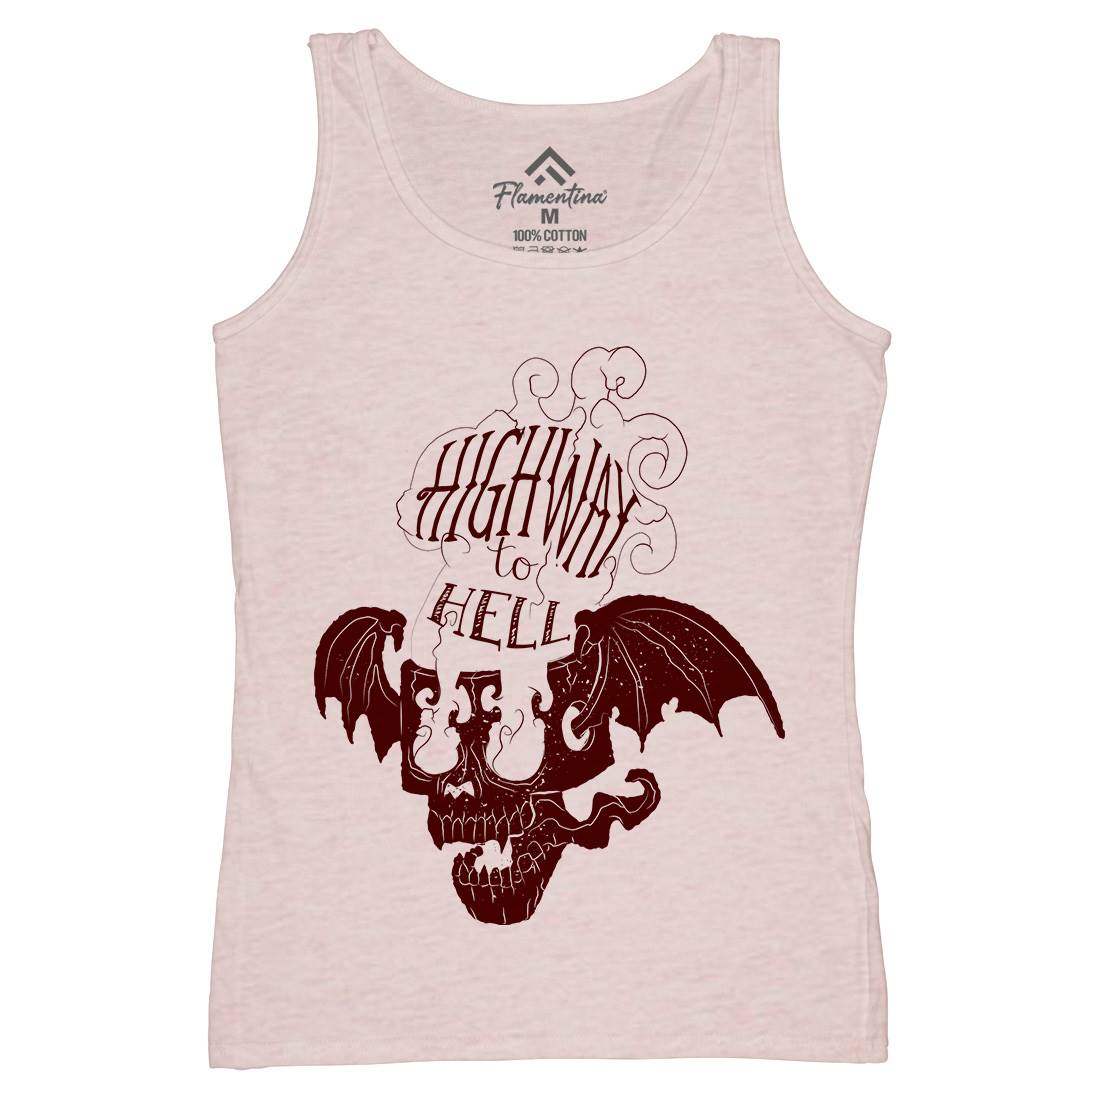 Highway To Hell Womens Organic Tank Top Vest Motorcycles A959